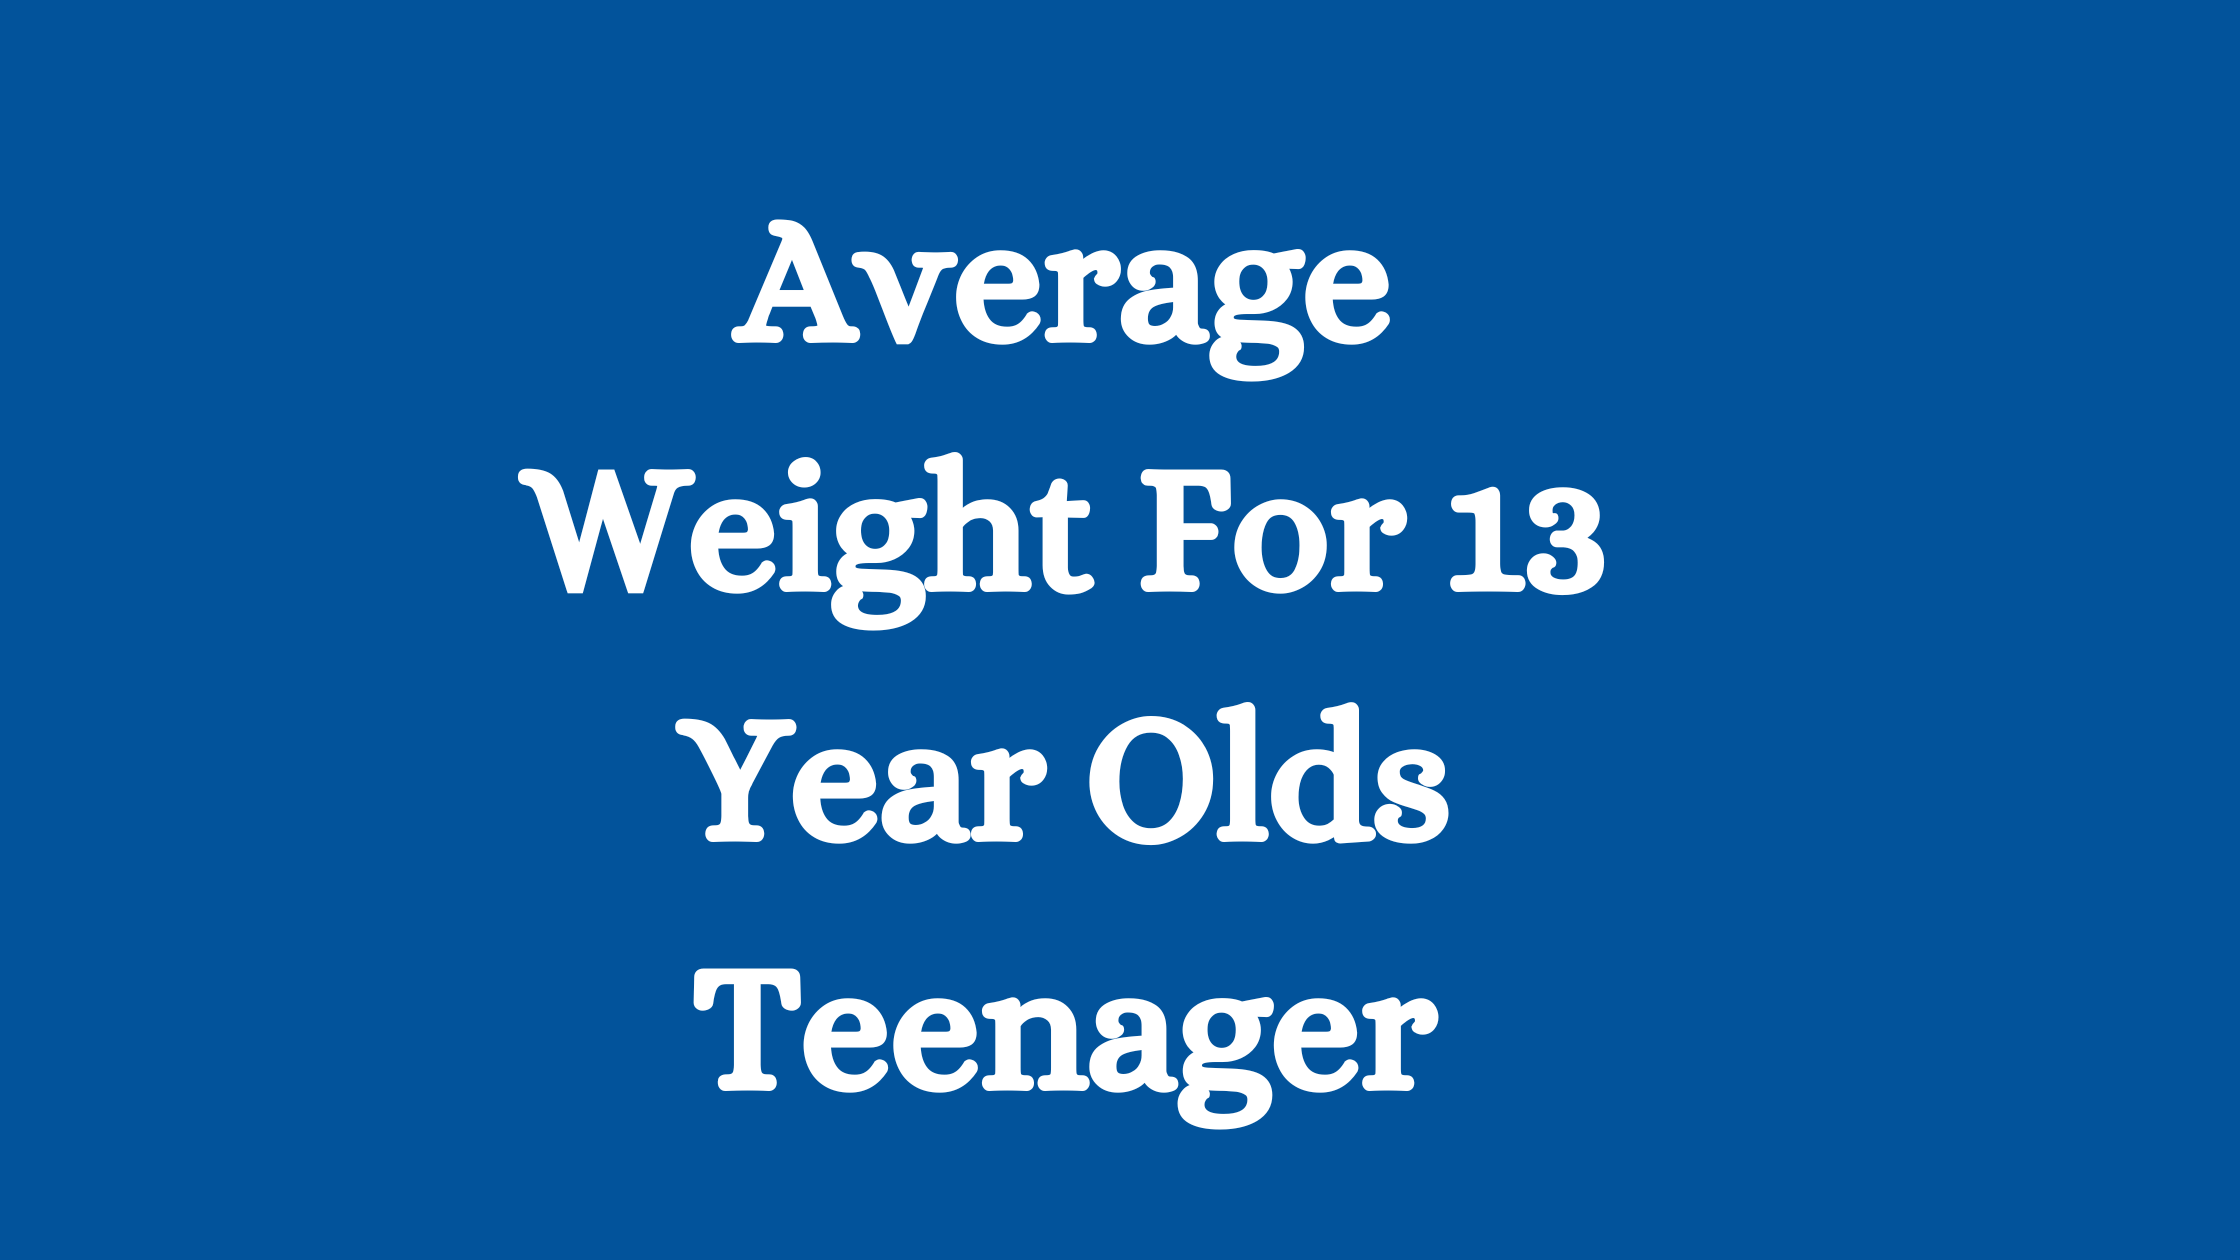 13 year olds weigh